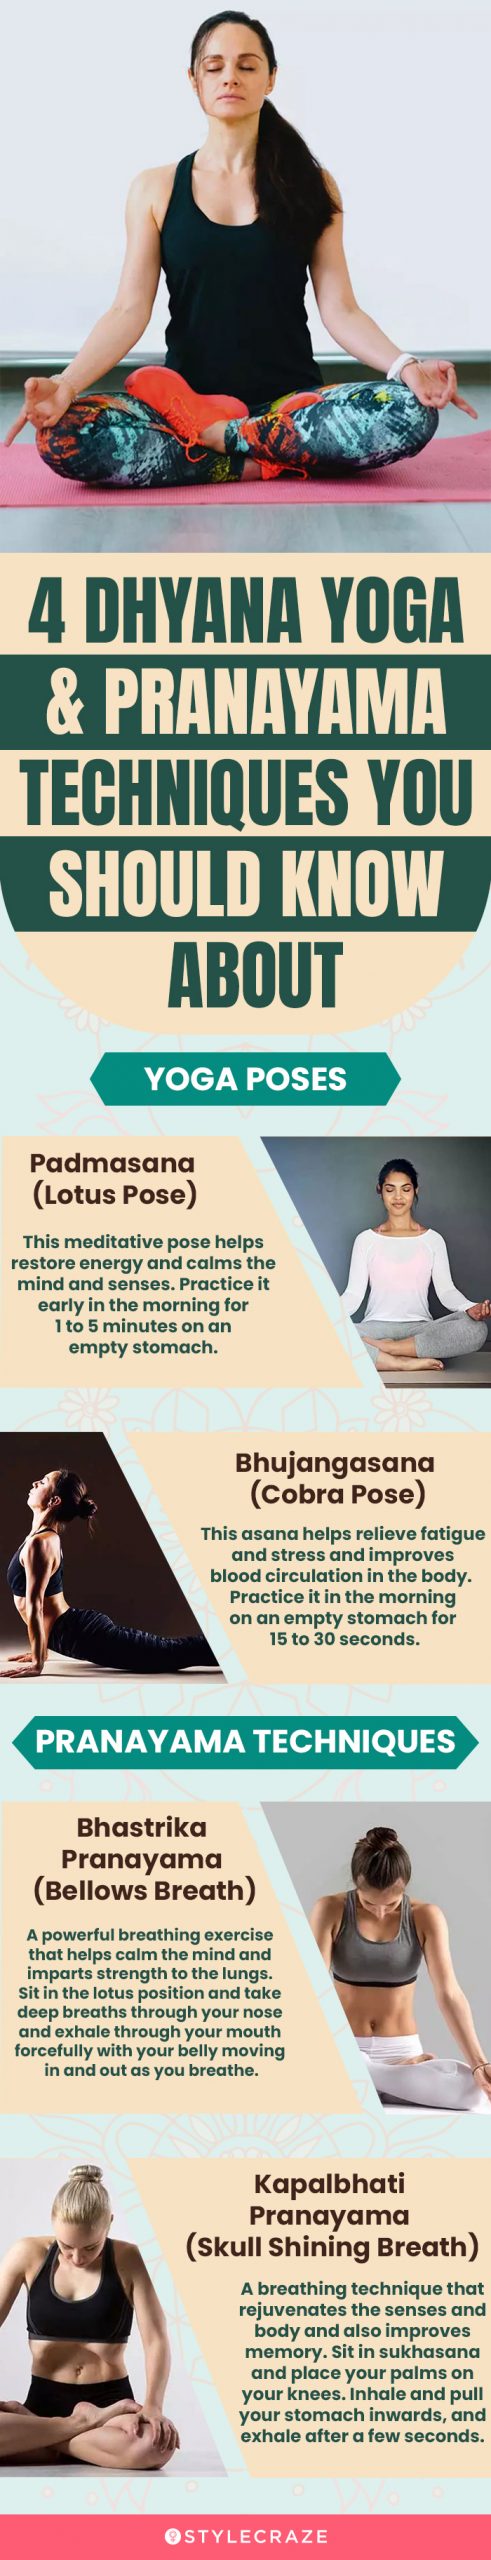 4 dhyana yoga & pranayama techniques you should know about (infographic)